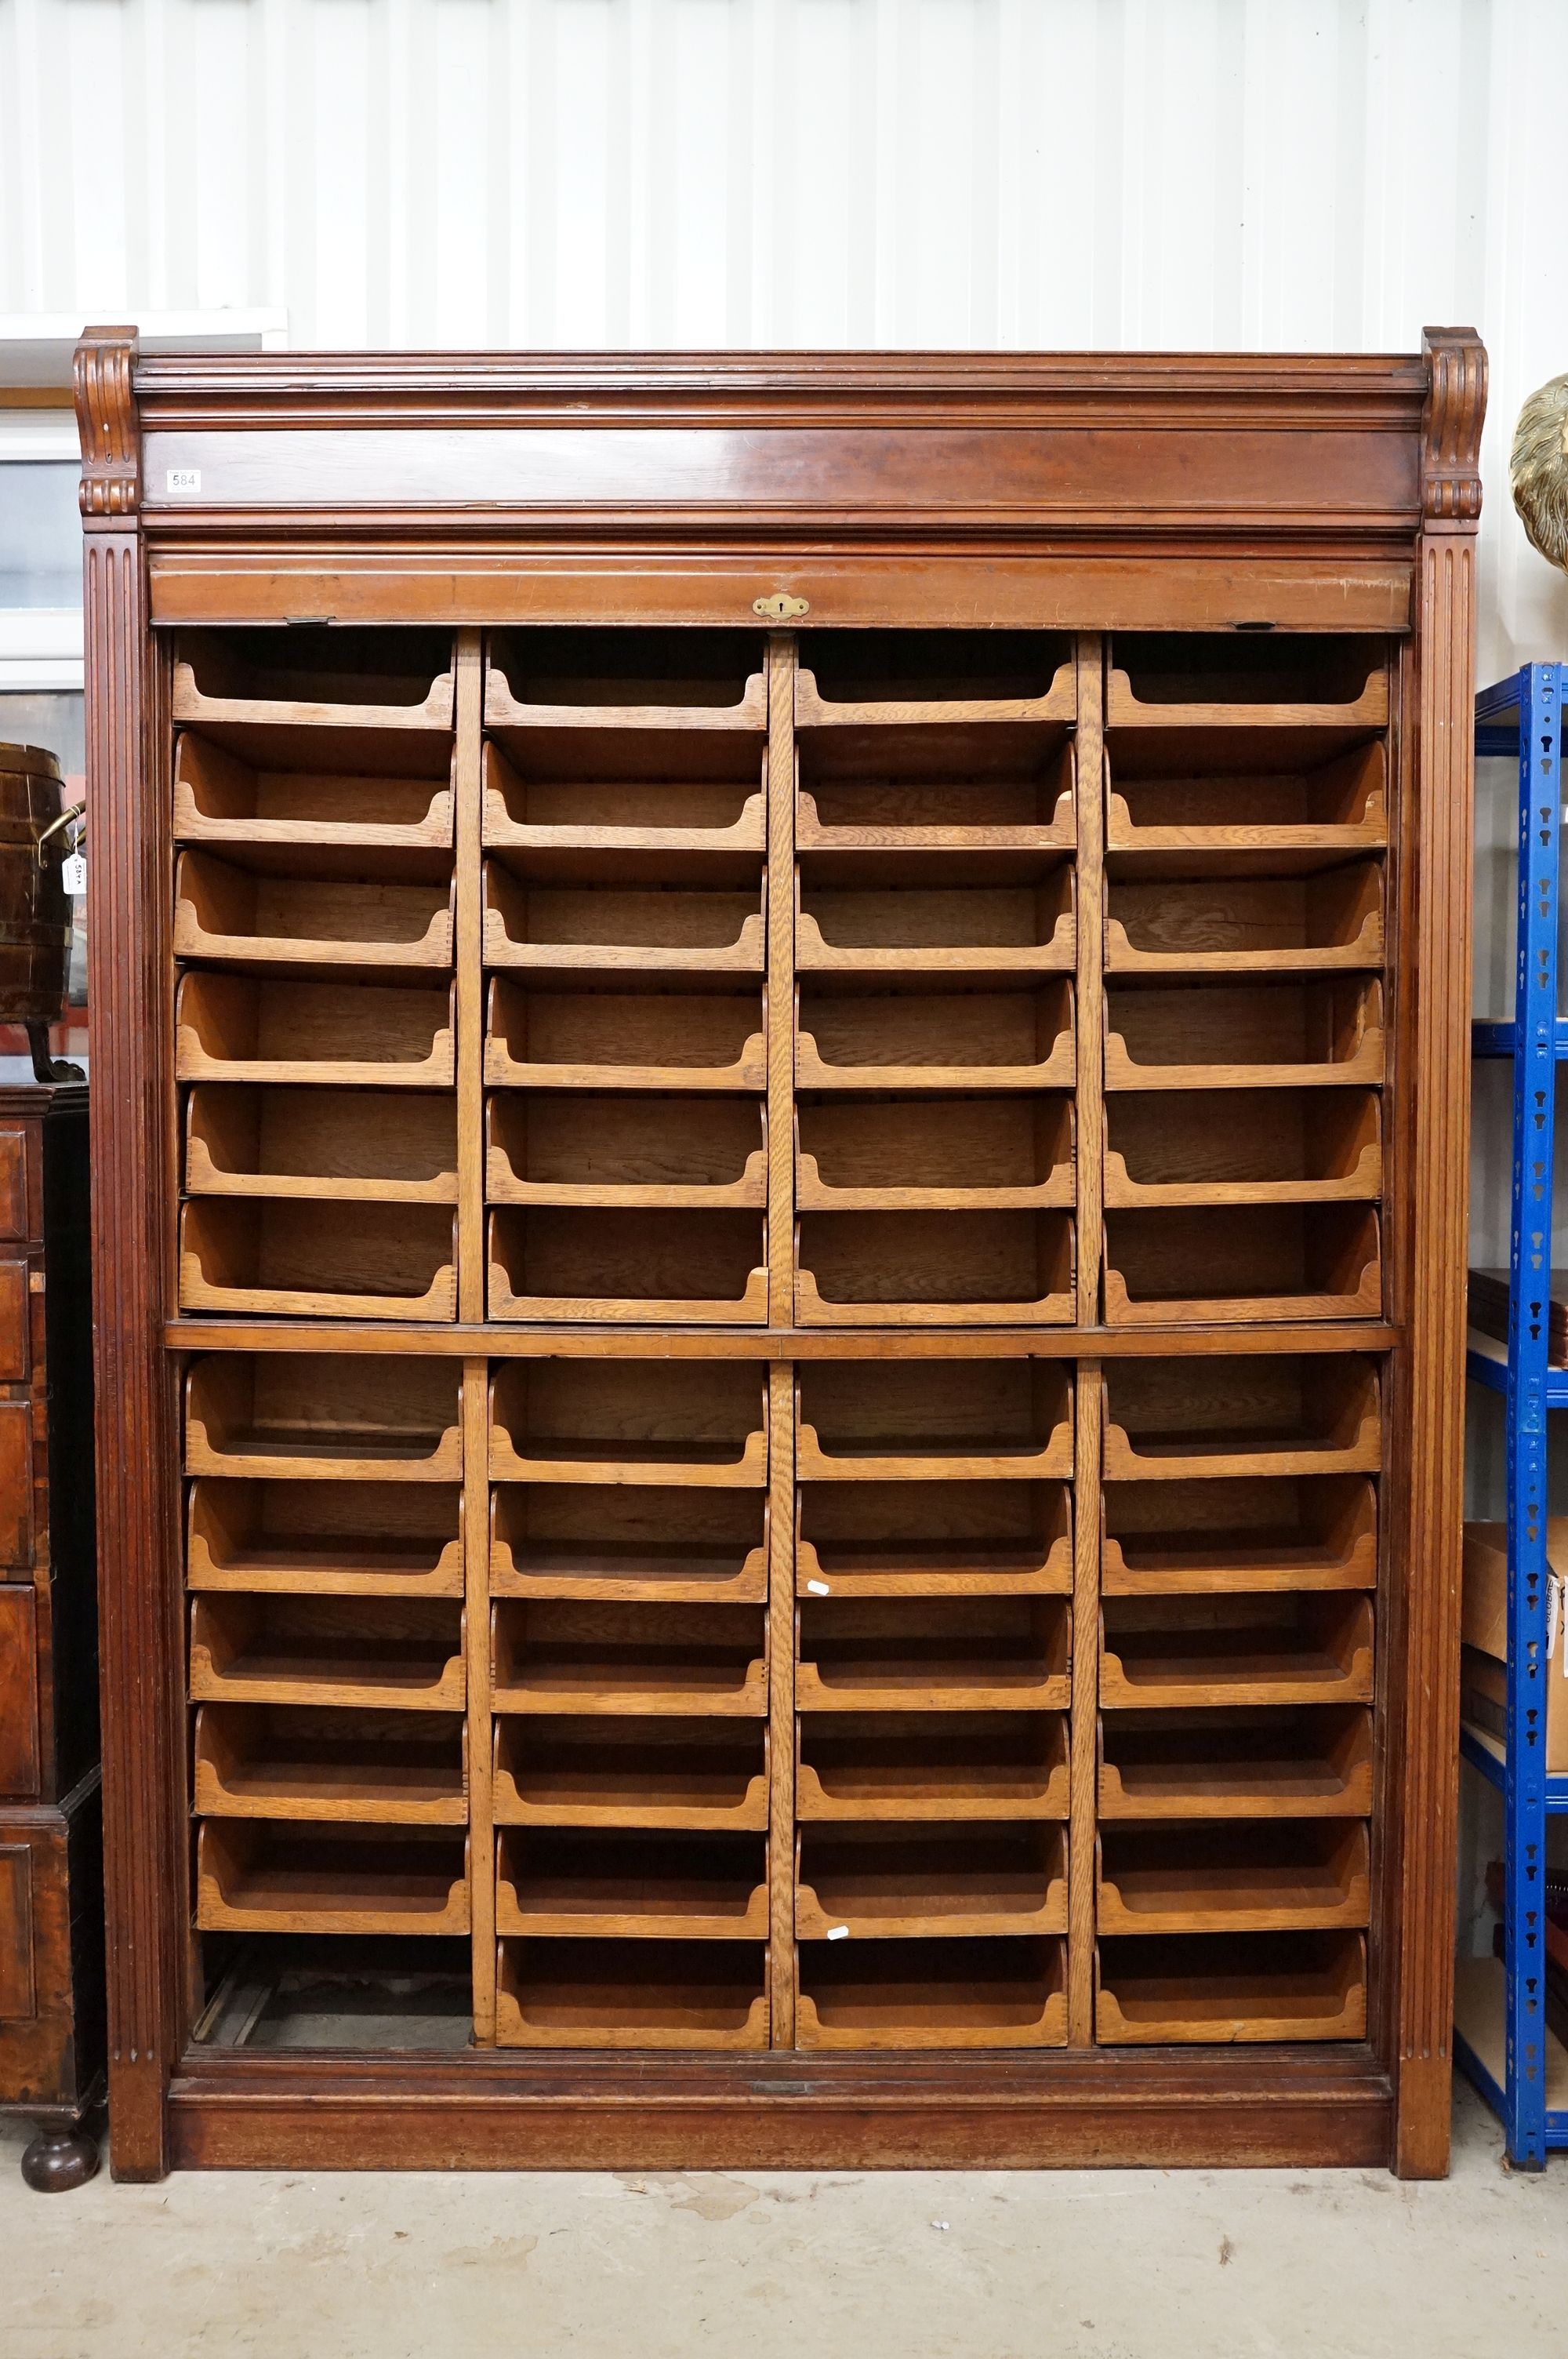 Early 20th century mahogany haberdashery cabinet, with an internal arrangement of forty seven oak